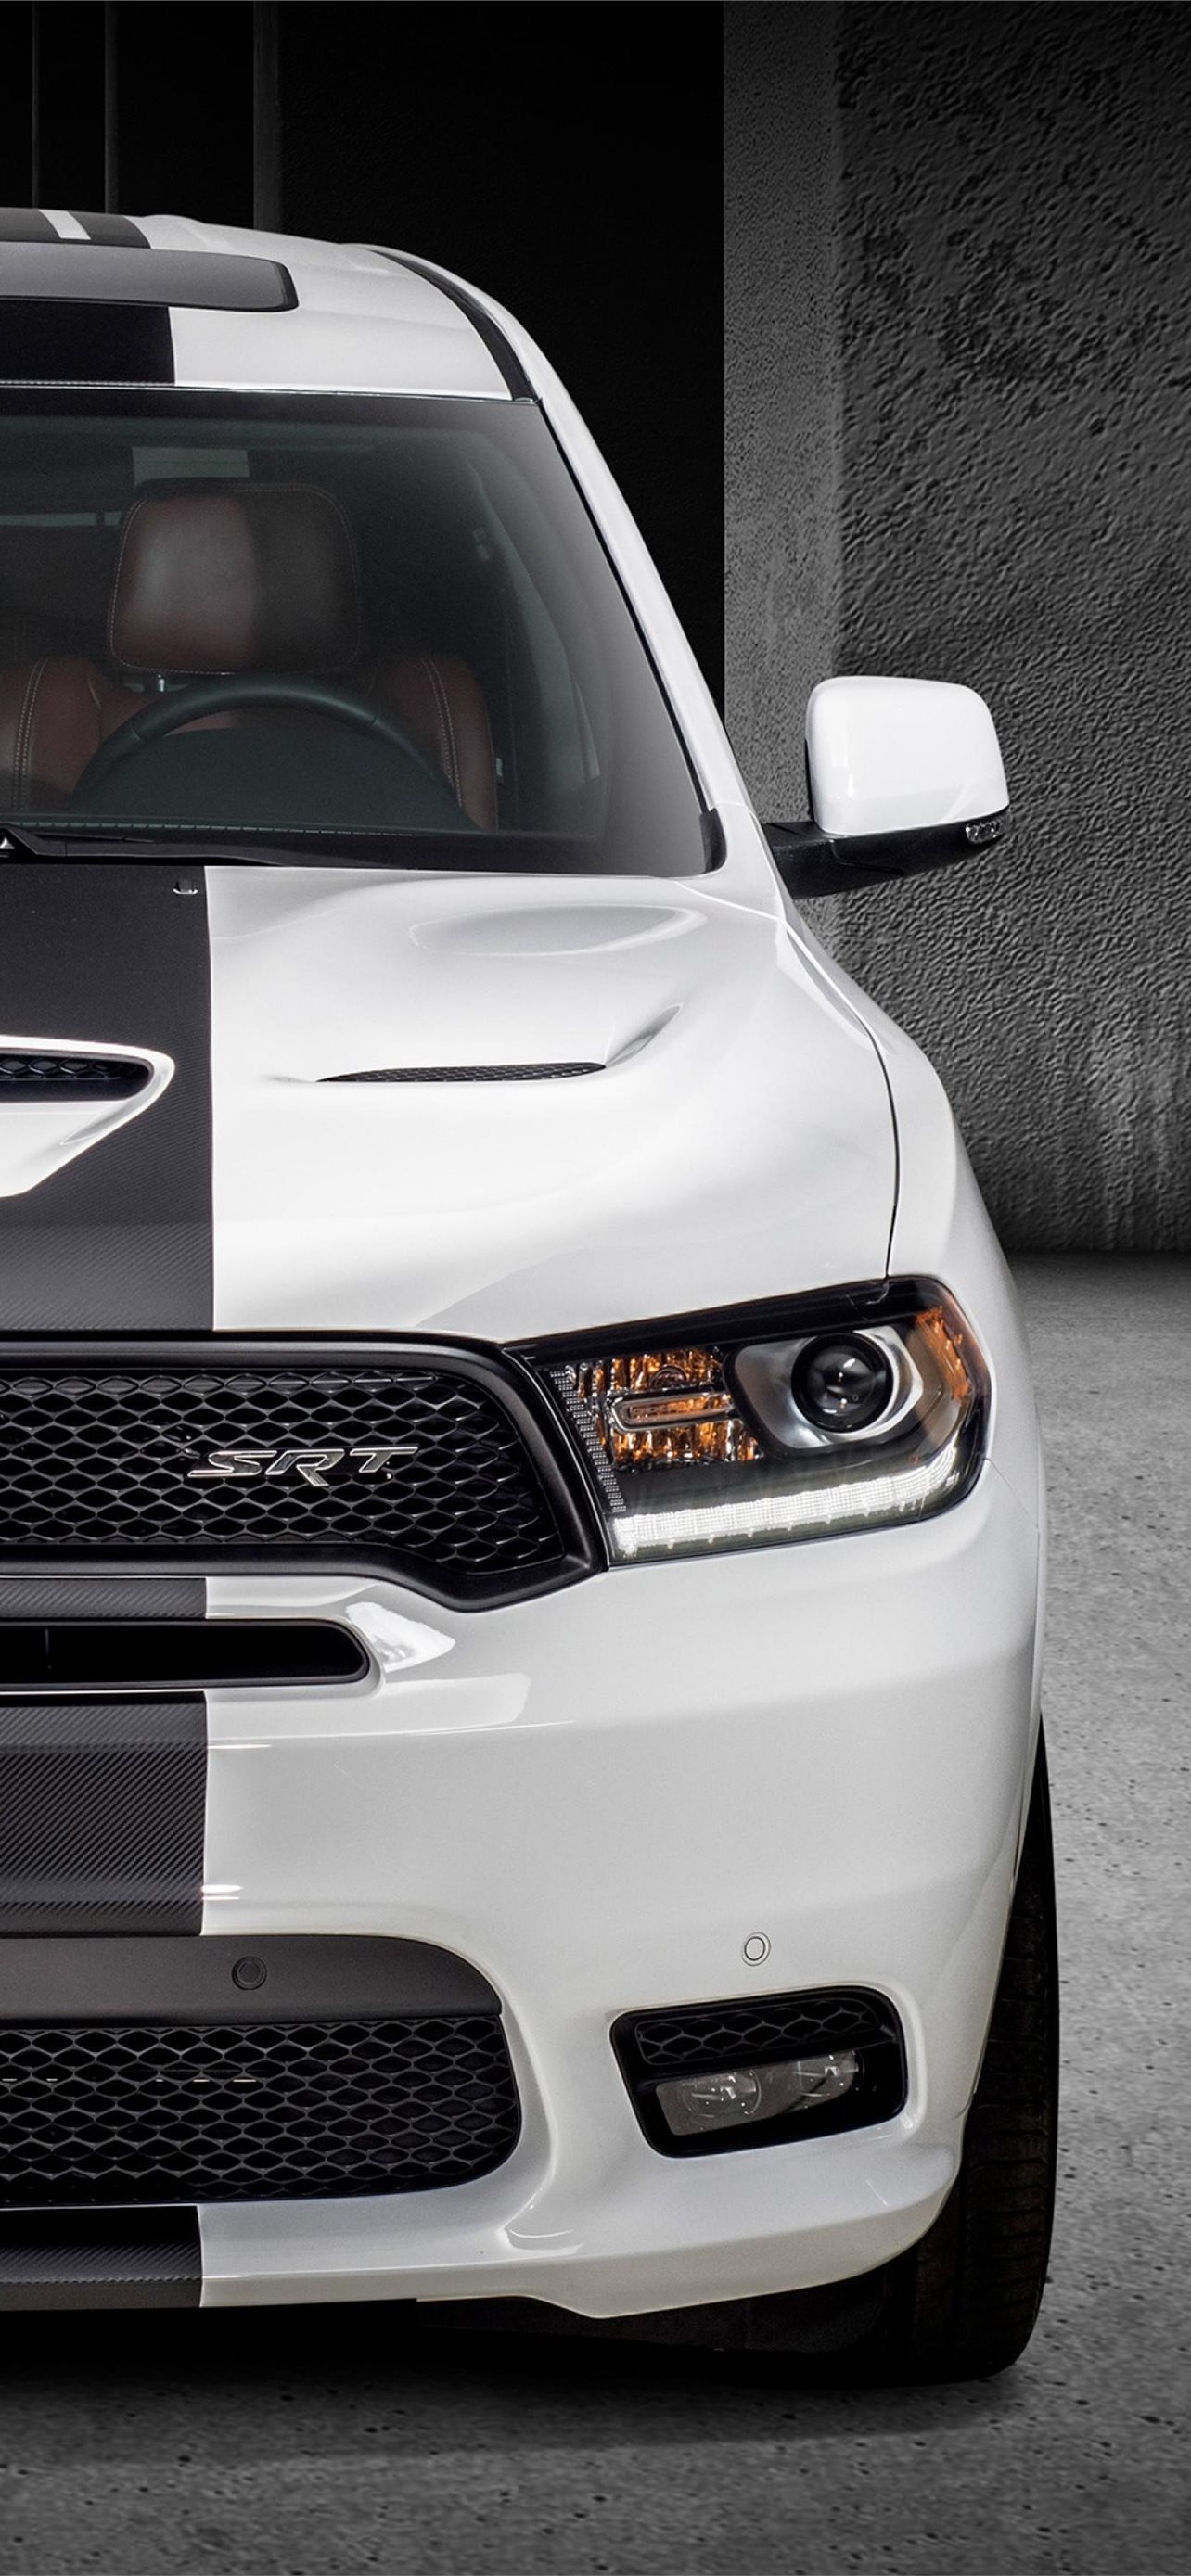 Dodge Durango SRT, Best iPhone wallpapers, High-quality images, Enhance your device, 1290x2780 HD Phone